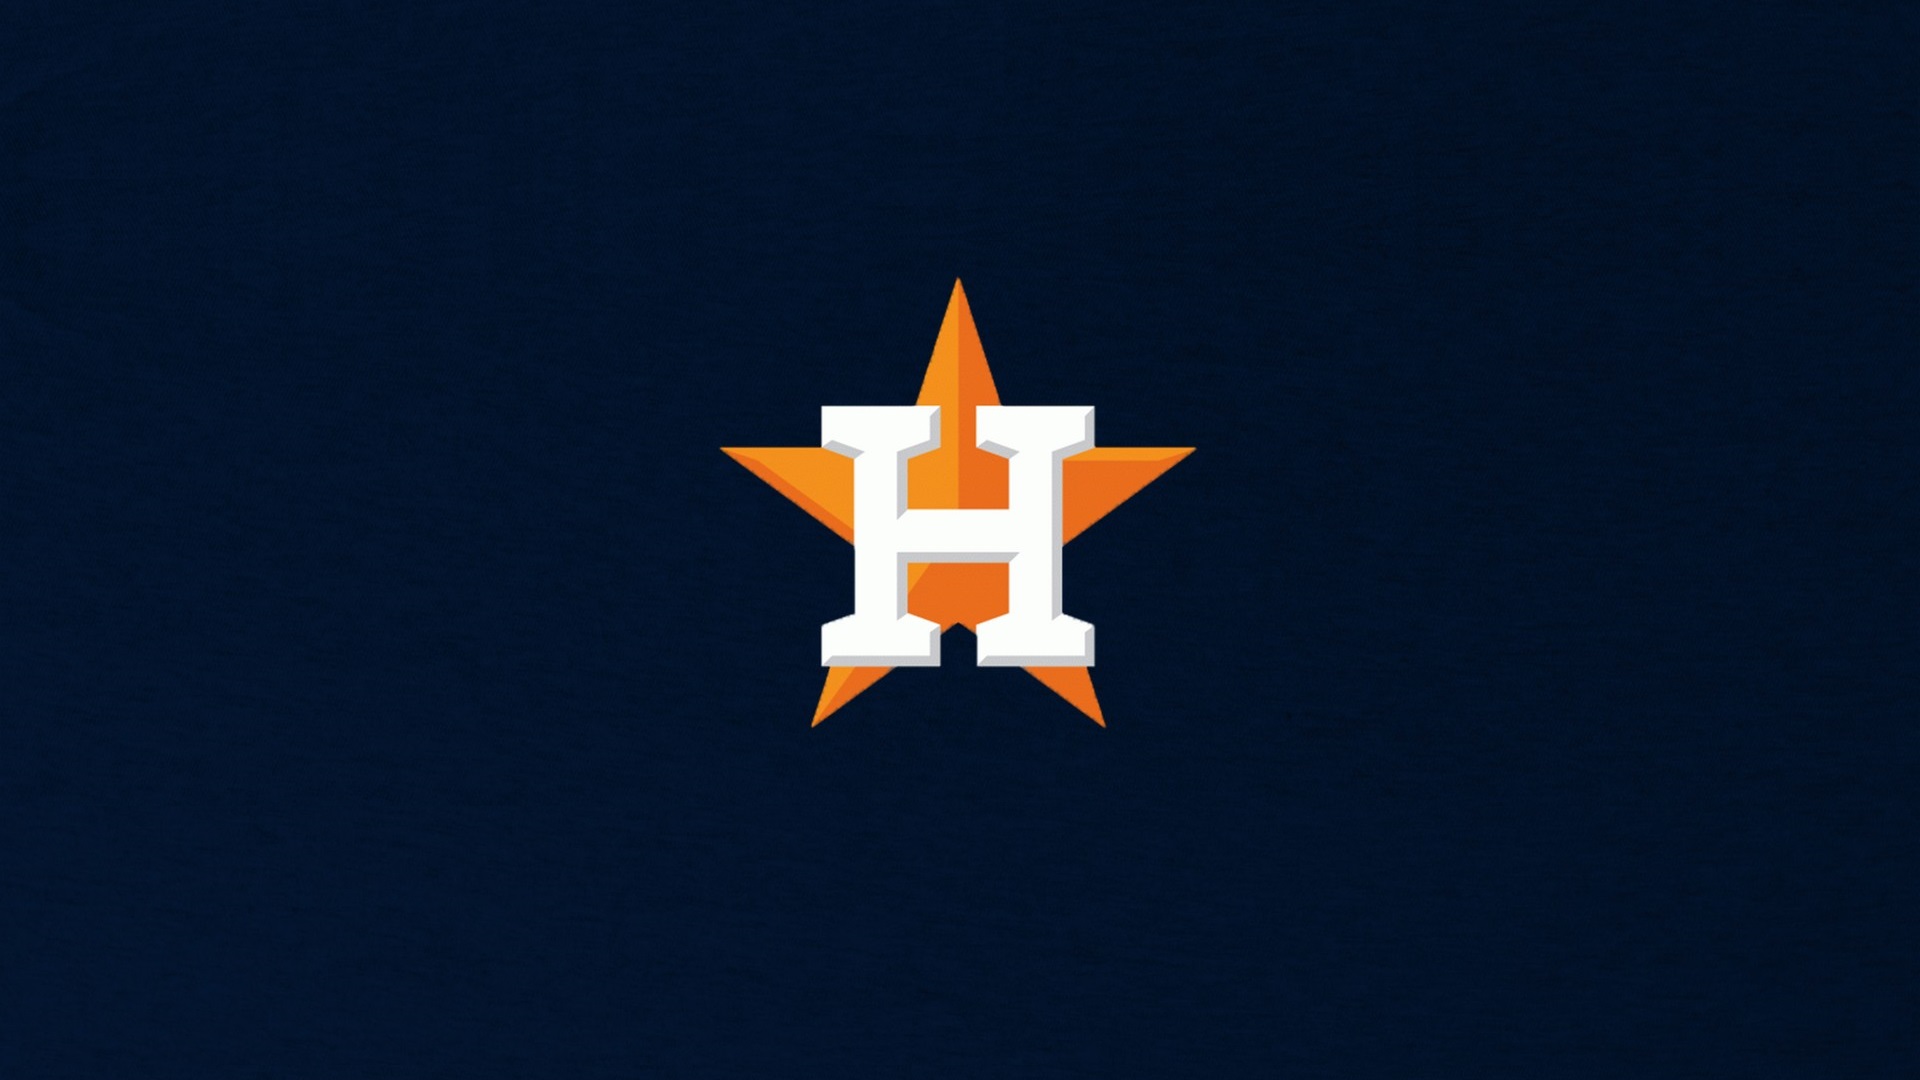 HD Backgrounds Houston Astros with high-resolution 1920x1080 pixel. You can use this wallpaper for Mac Desktop Wallpaper, Laptop Screensavers, Android Wallpapers, Tablet or iPhone Home Screen and another mobile phone device